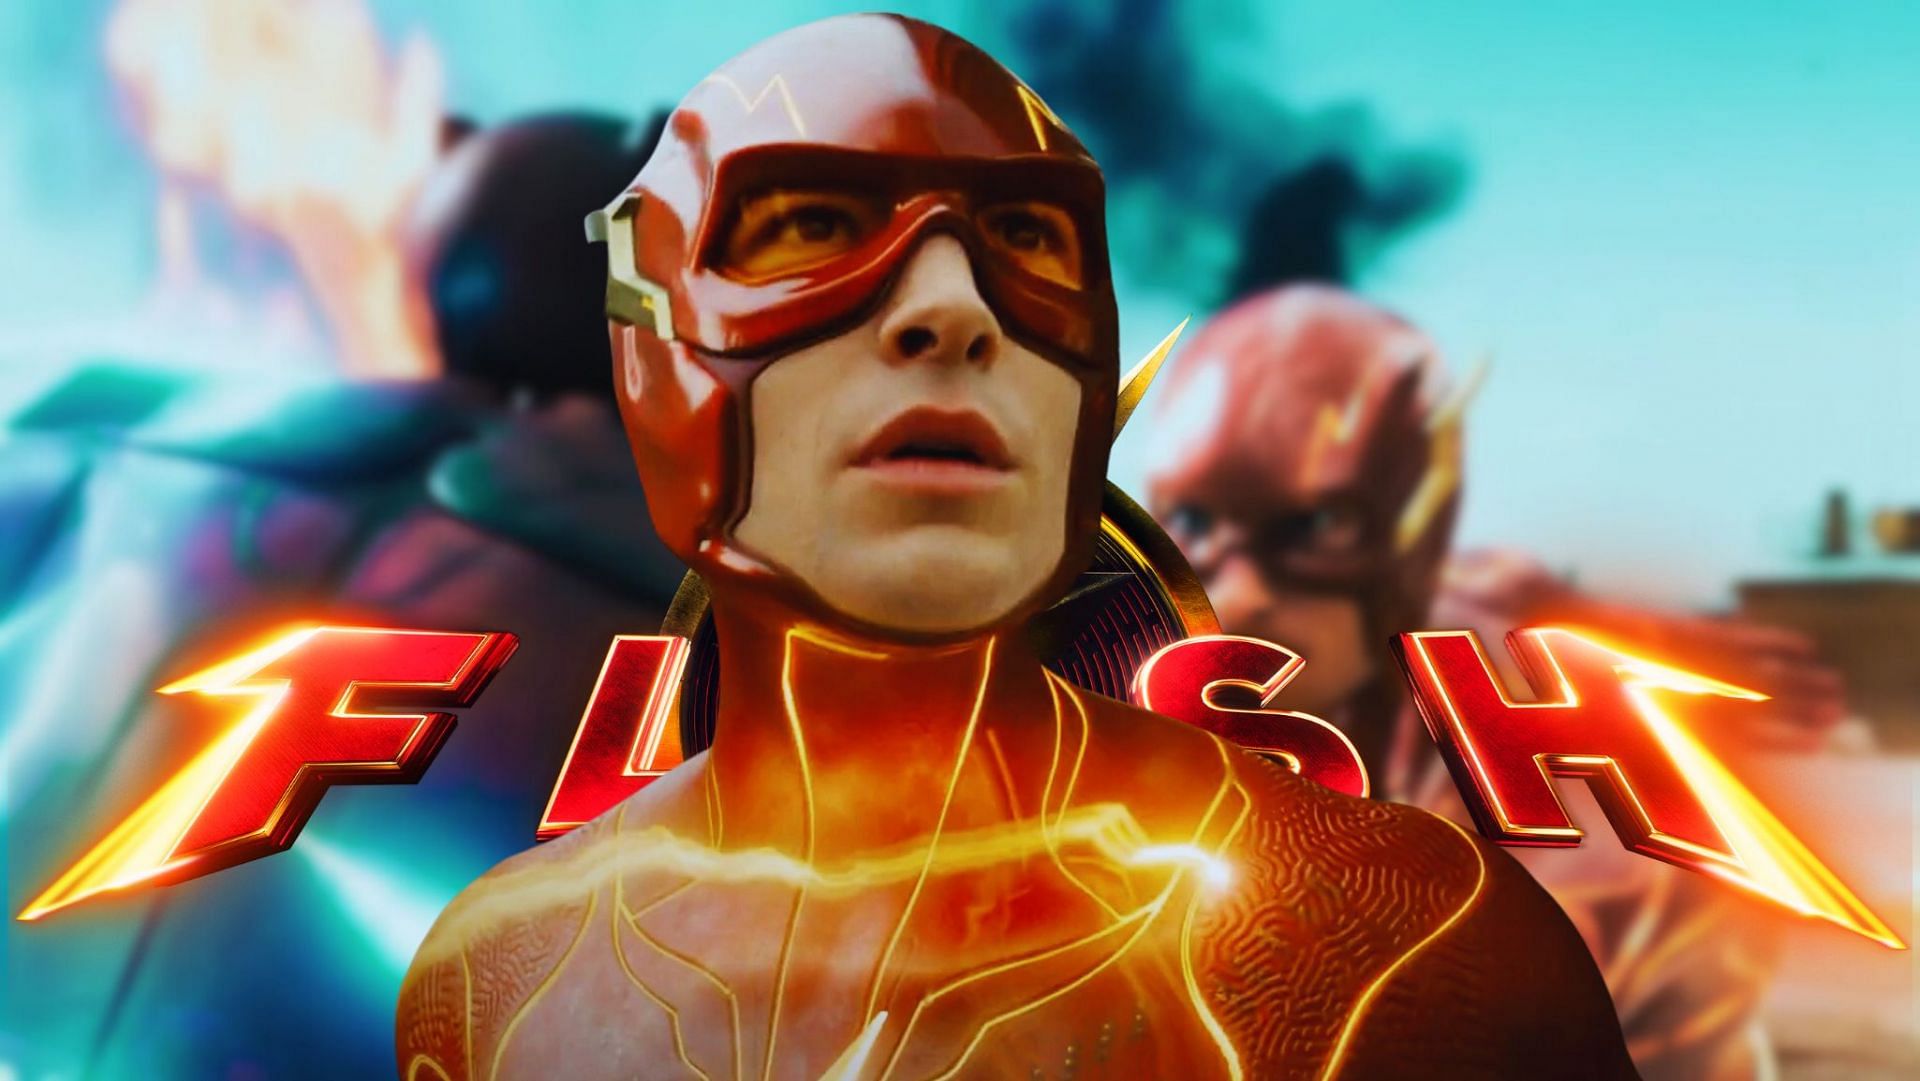 Speed into the Multiverse: The Flash dashes into early screenings - Experience the epic journey for free! (Image via Sportskeeda)